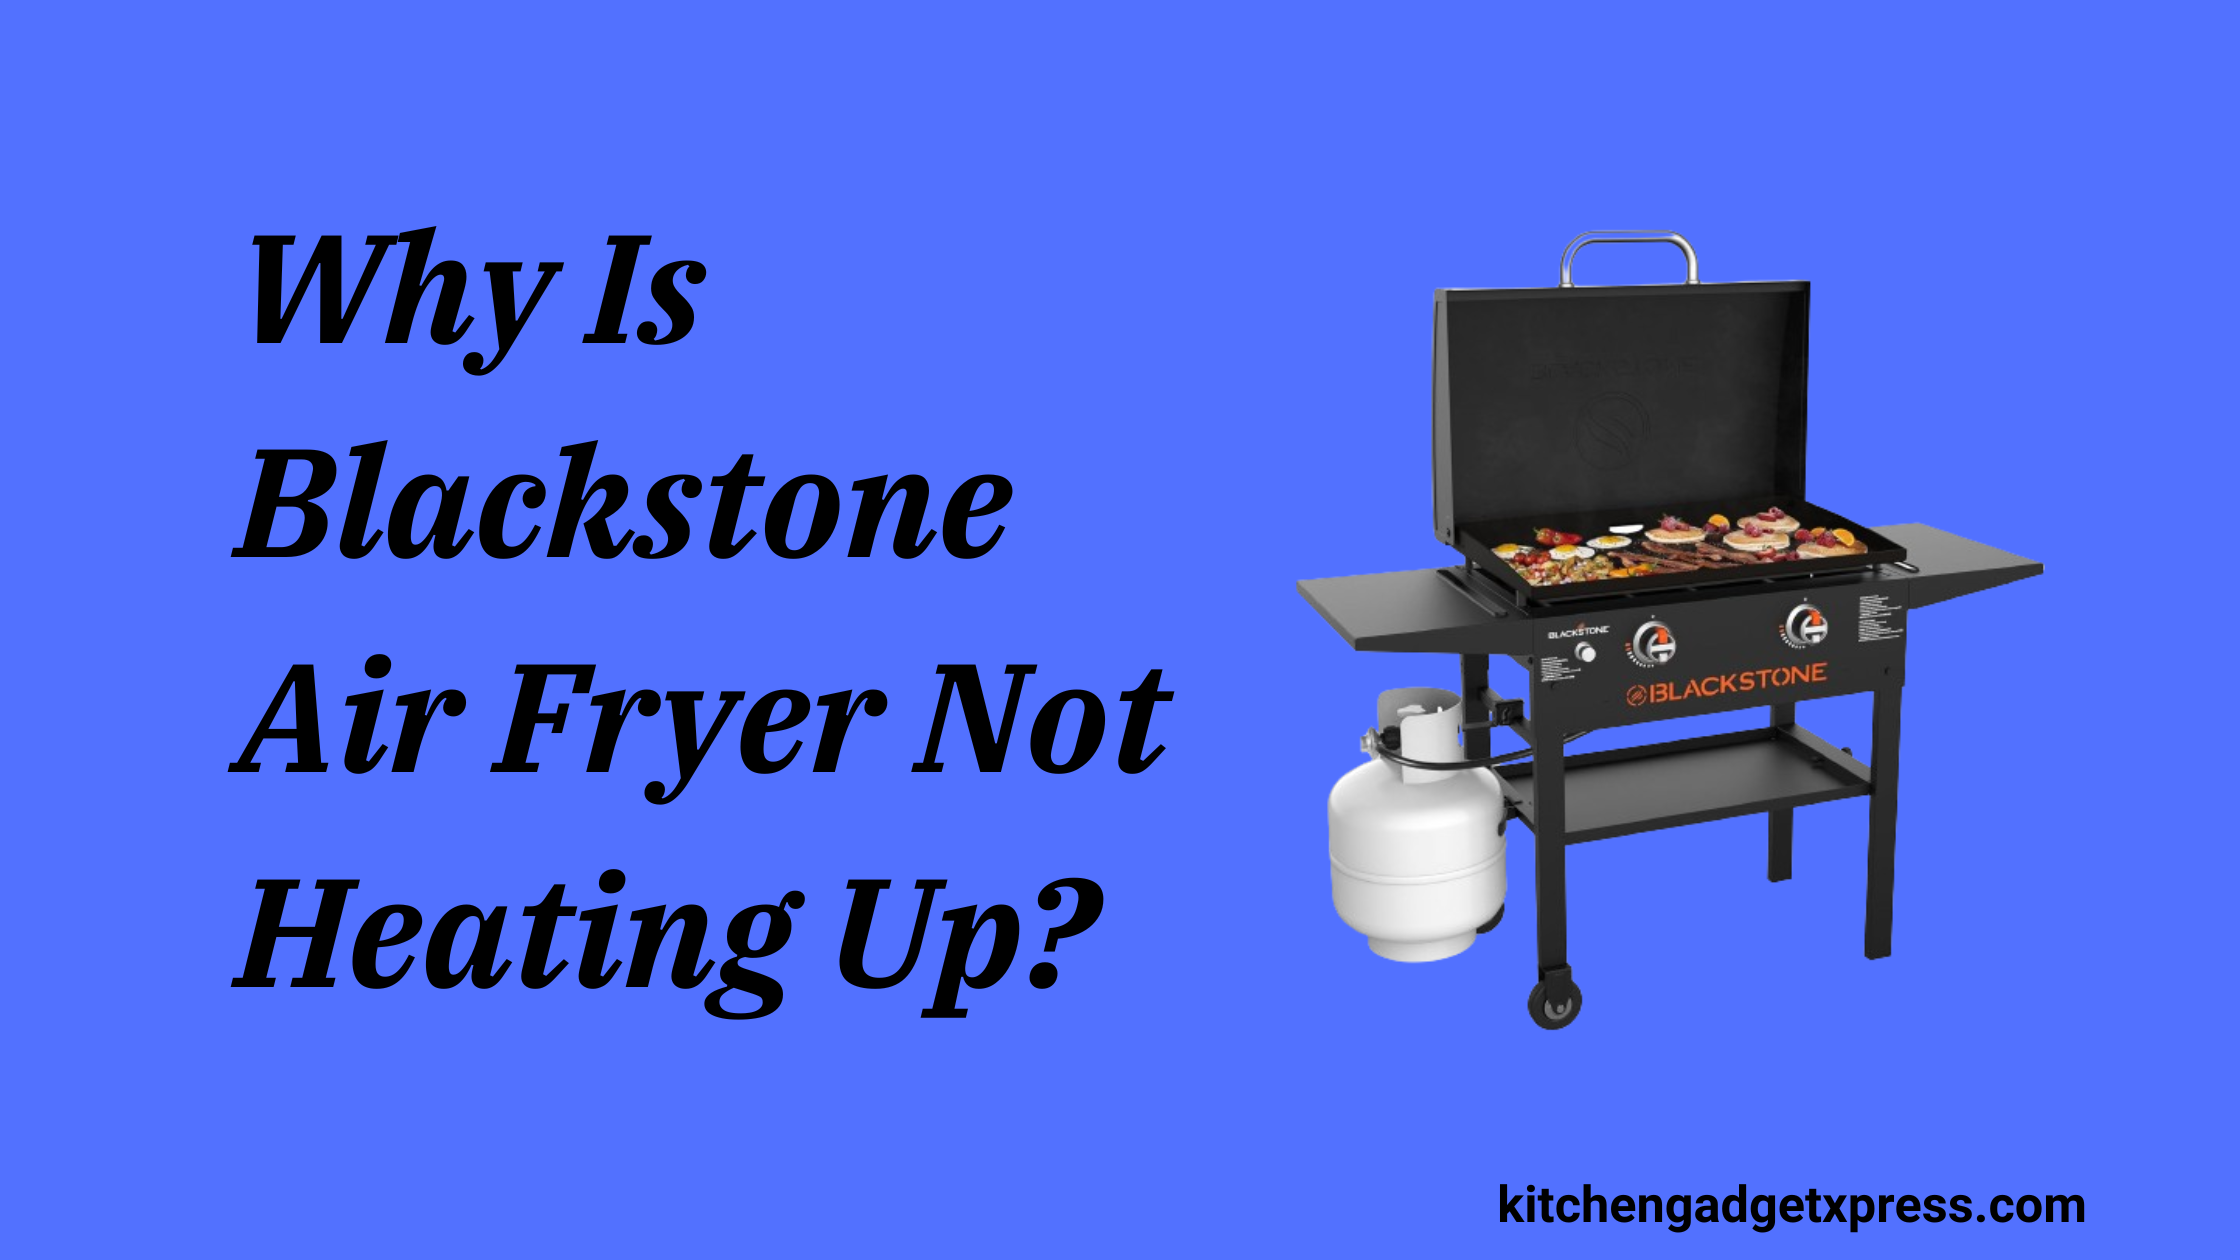 Why Is Blackstone Air Fryer Not Heating Up